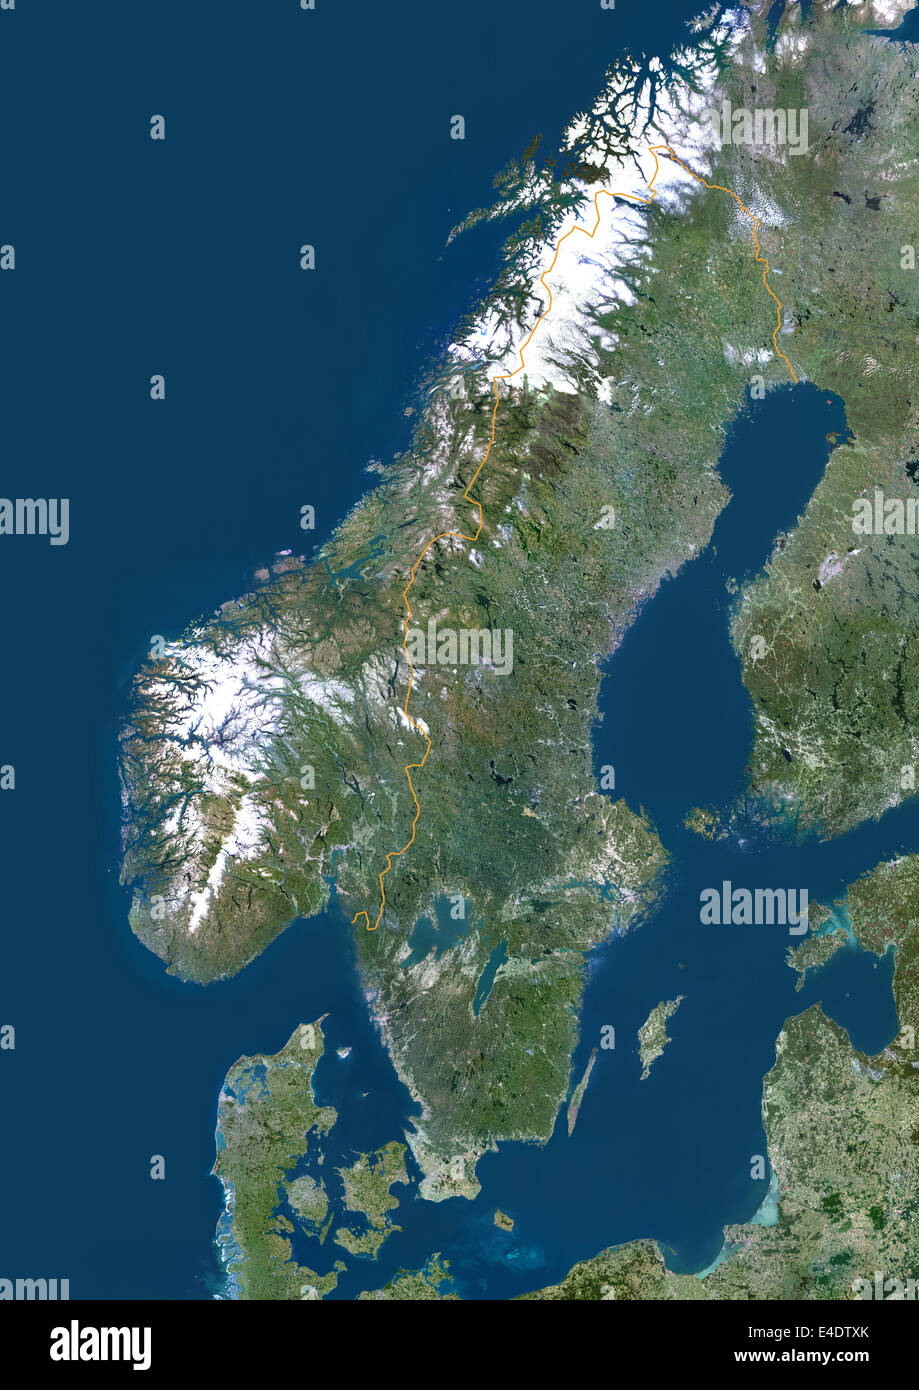 Sweden, Europe, True Colour Satellite Image With Border. Satellite view of Sweden (with border). This image was compiled from da Stock Photo